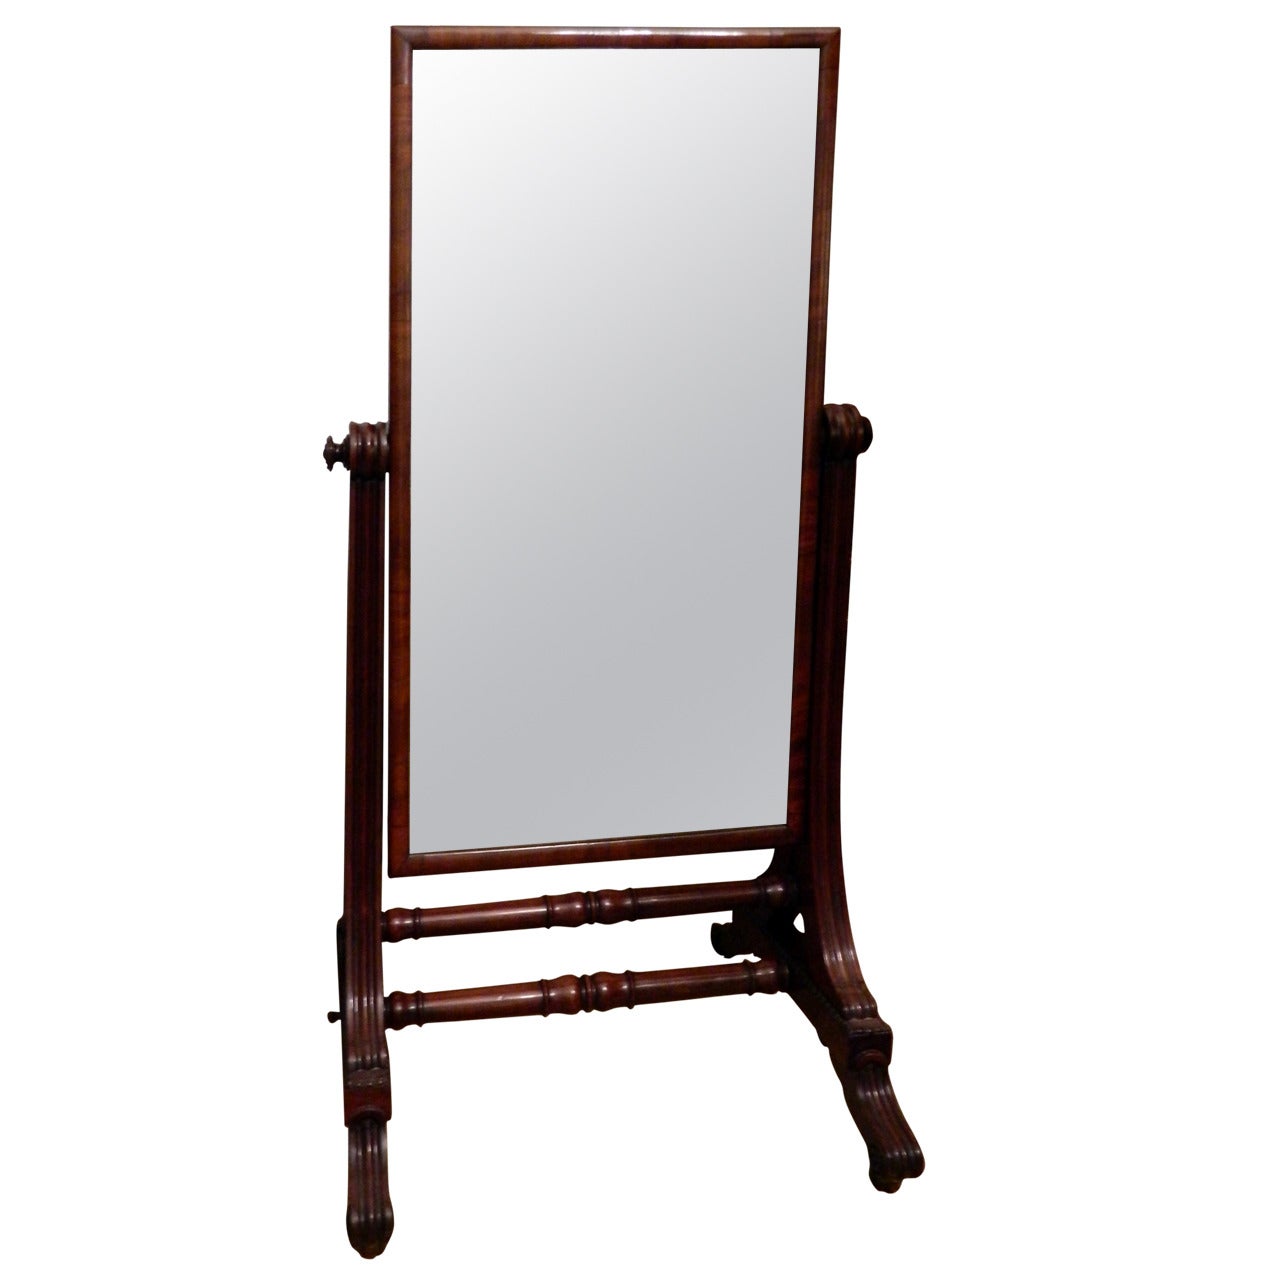 George III English Mahogany Cheval Mirror on Casters, 19th Century